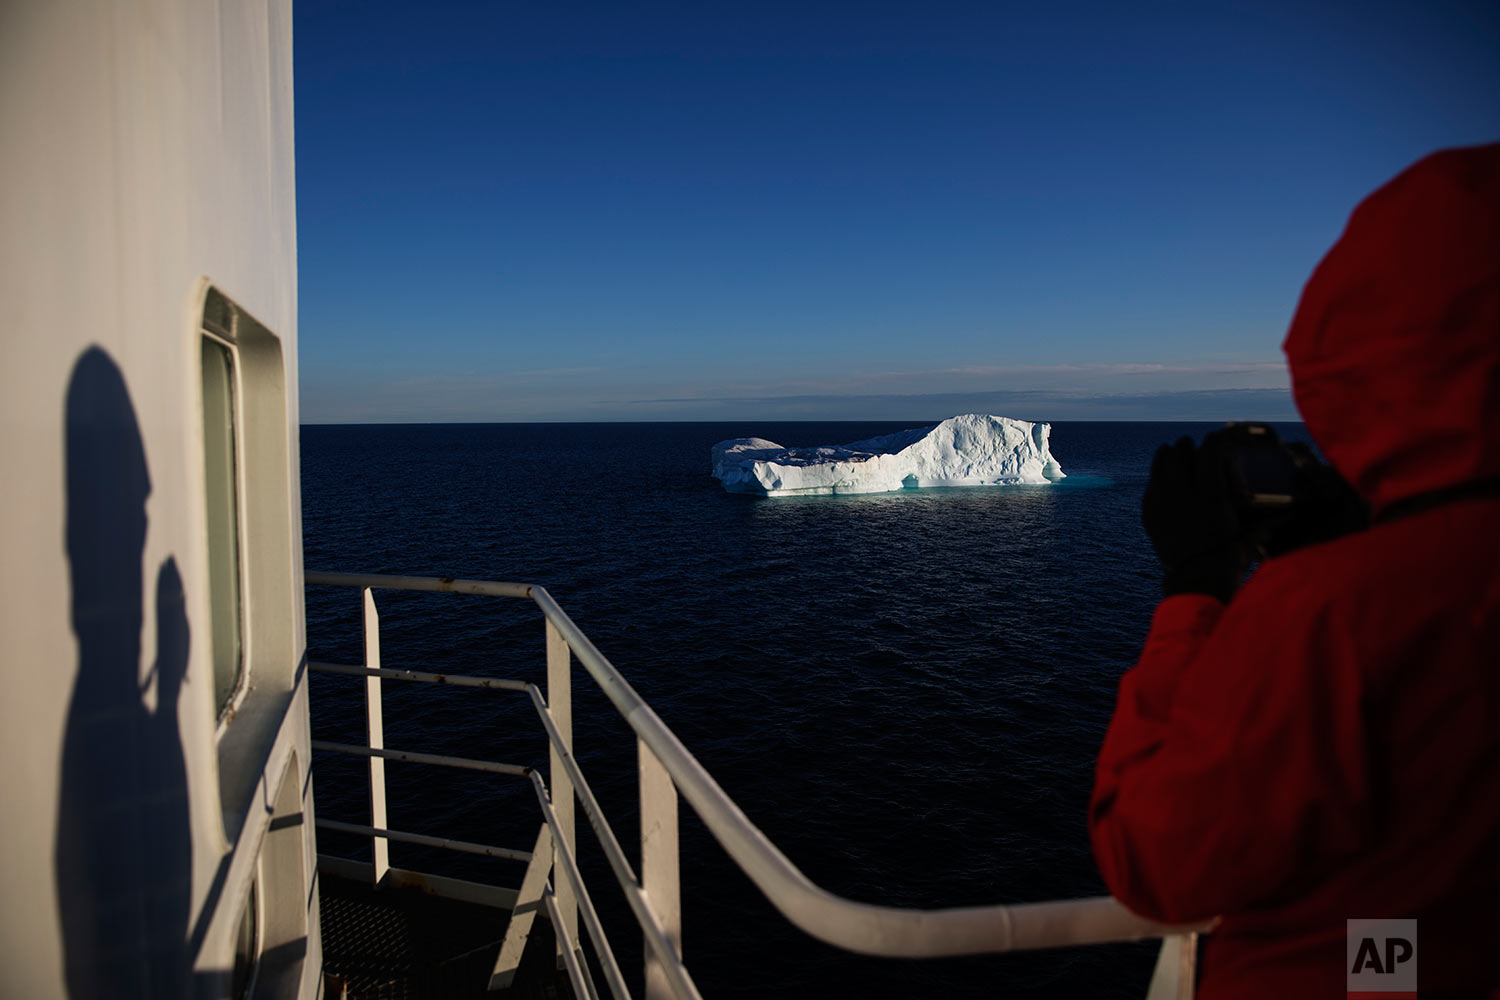  Researcher Tiina Jaaskelainen takes a picture of an iceberg floating in Baffin Bay in the Canadian Arctic Archipelago while aboard the Finnish icebreaker MSV Nordica, Tuesday, July 25, 2017. &nbsp;(AP Photo/David Goldman) 